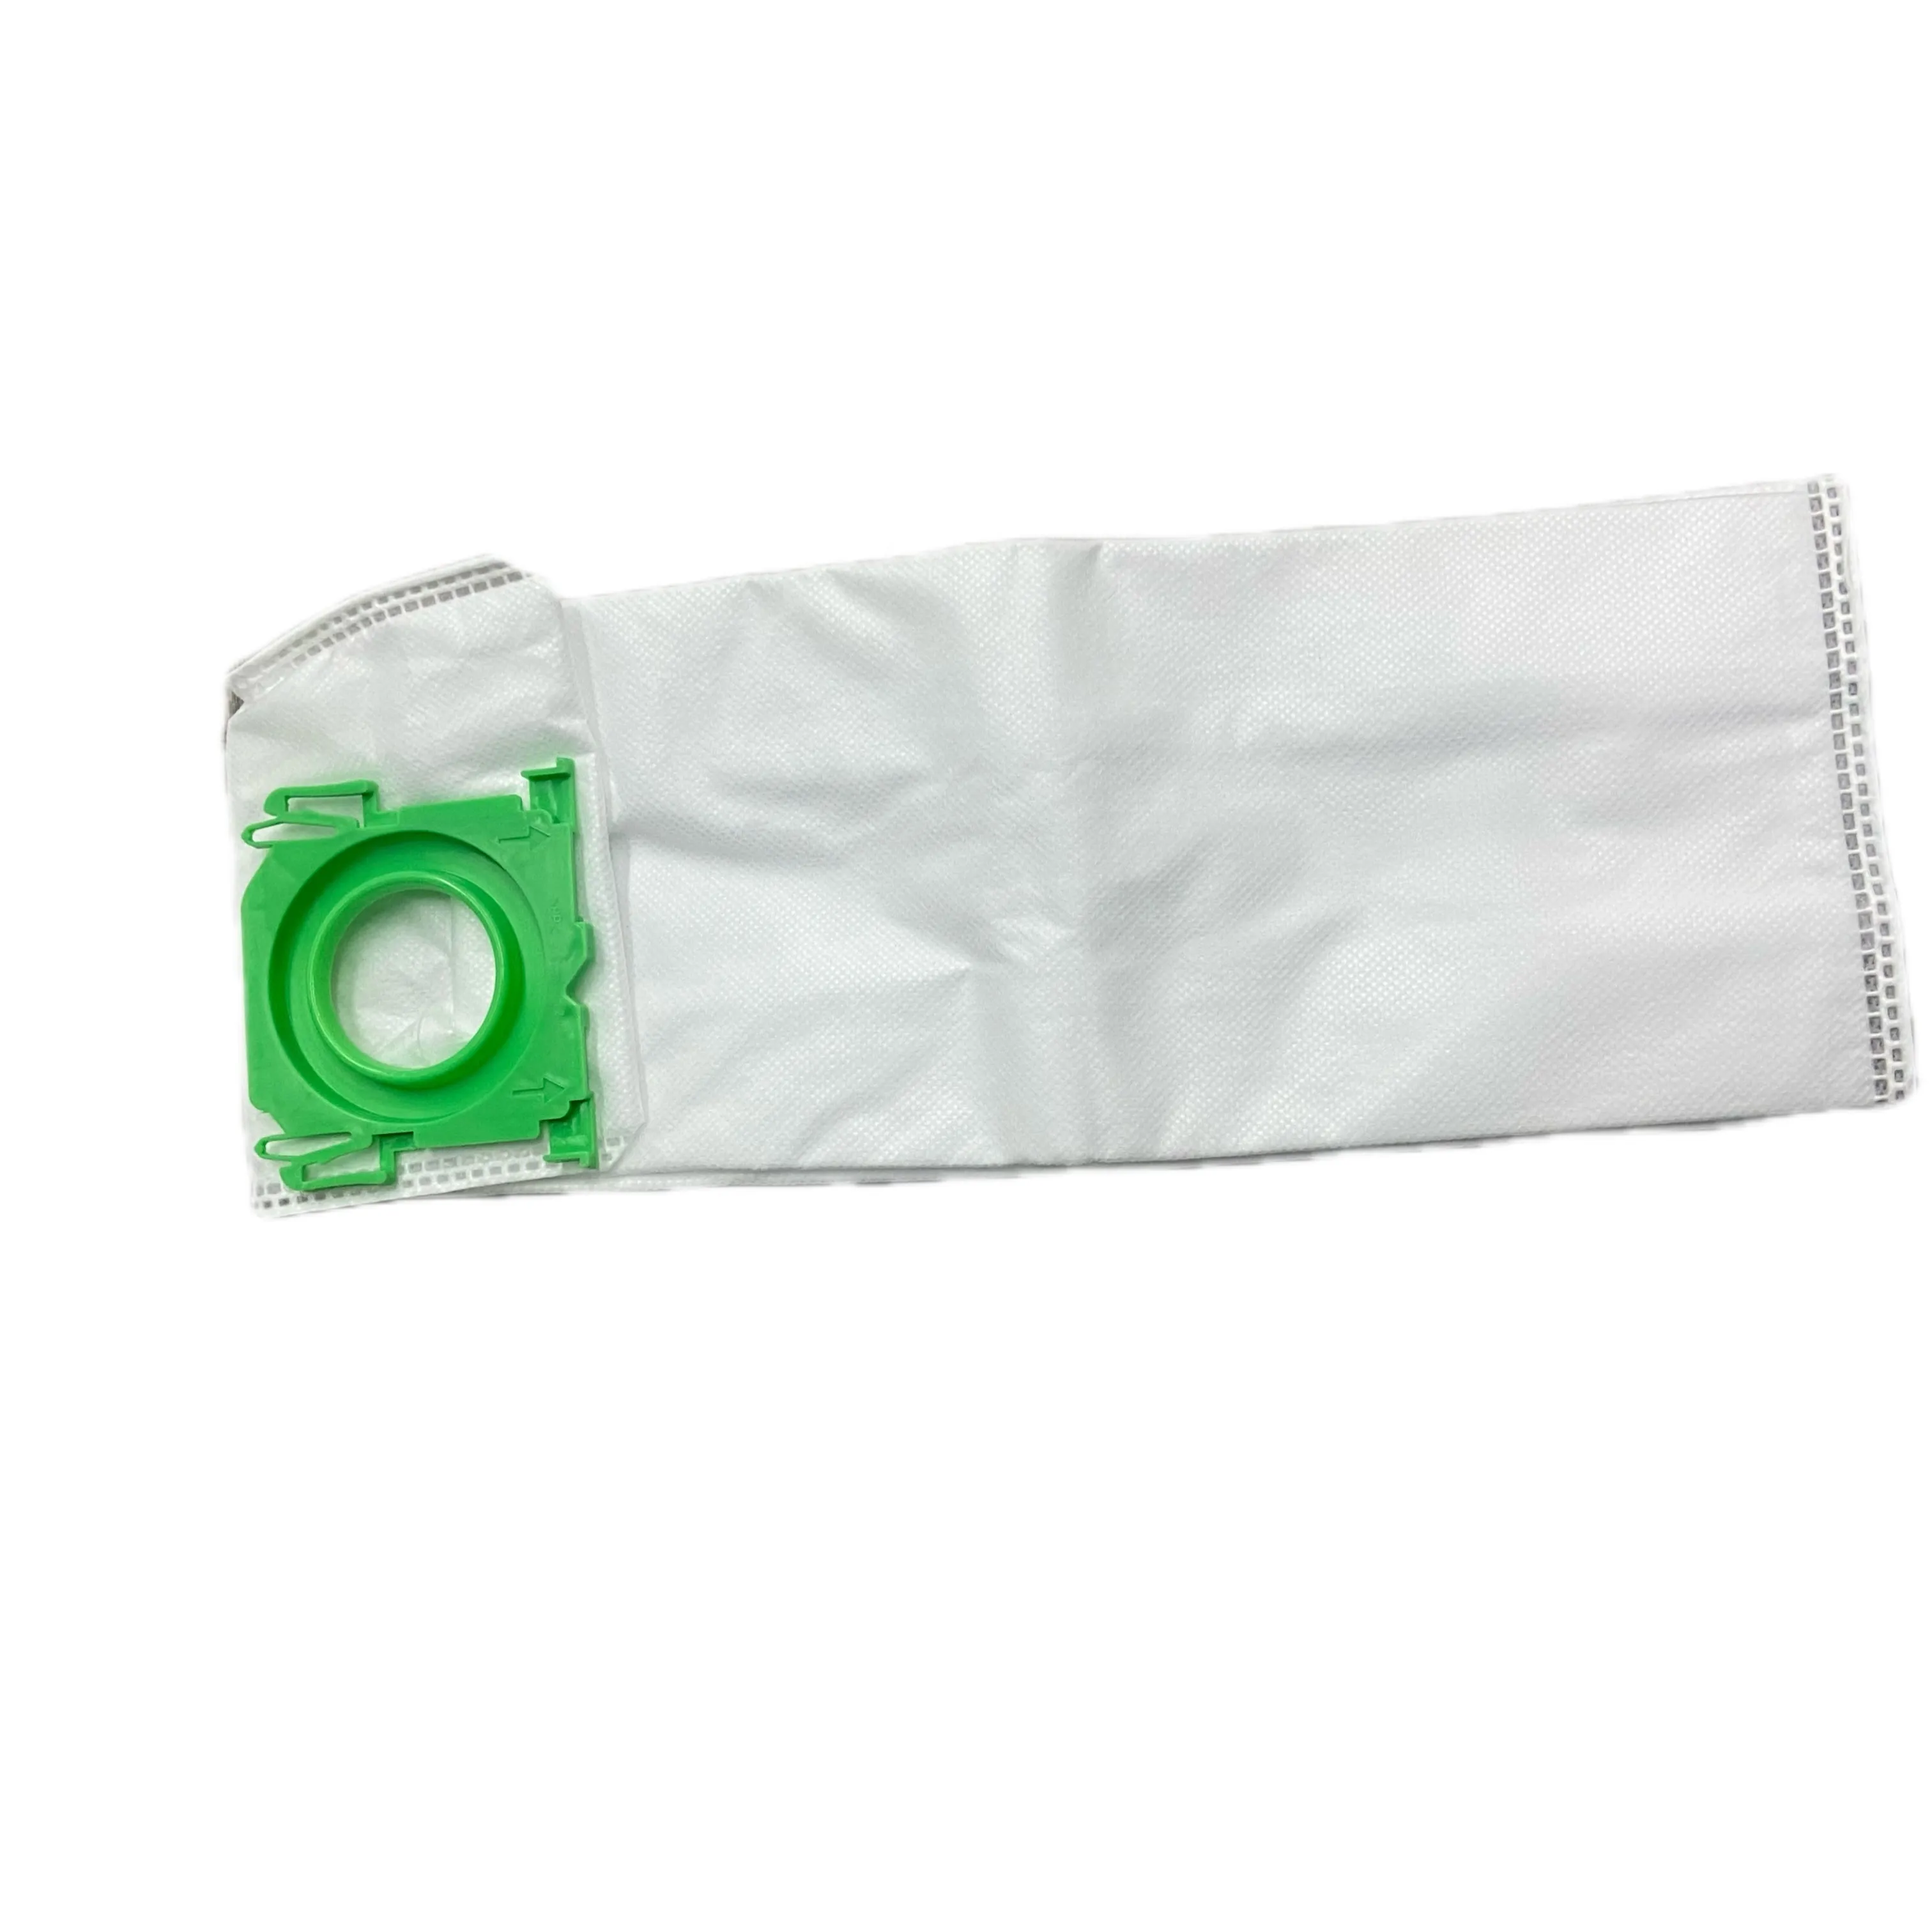 Replacement Vacuum Filter Dust Bag Compatible with Windsor Axcess Flexomatic & K archers CV300/380 Vacuums